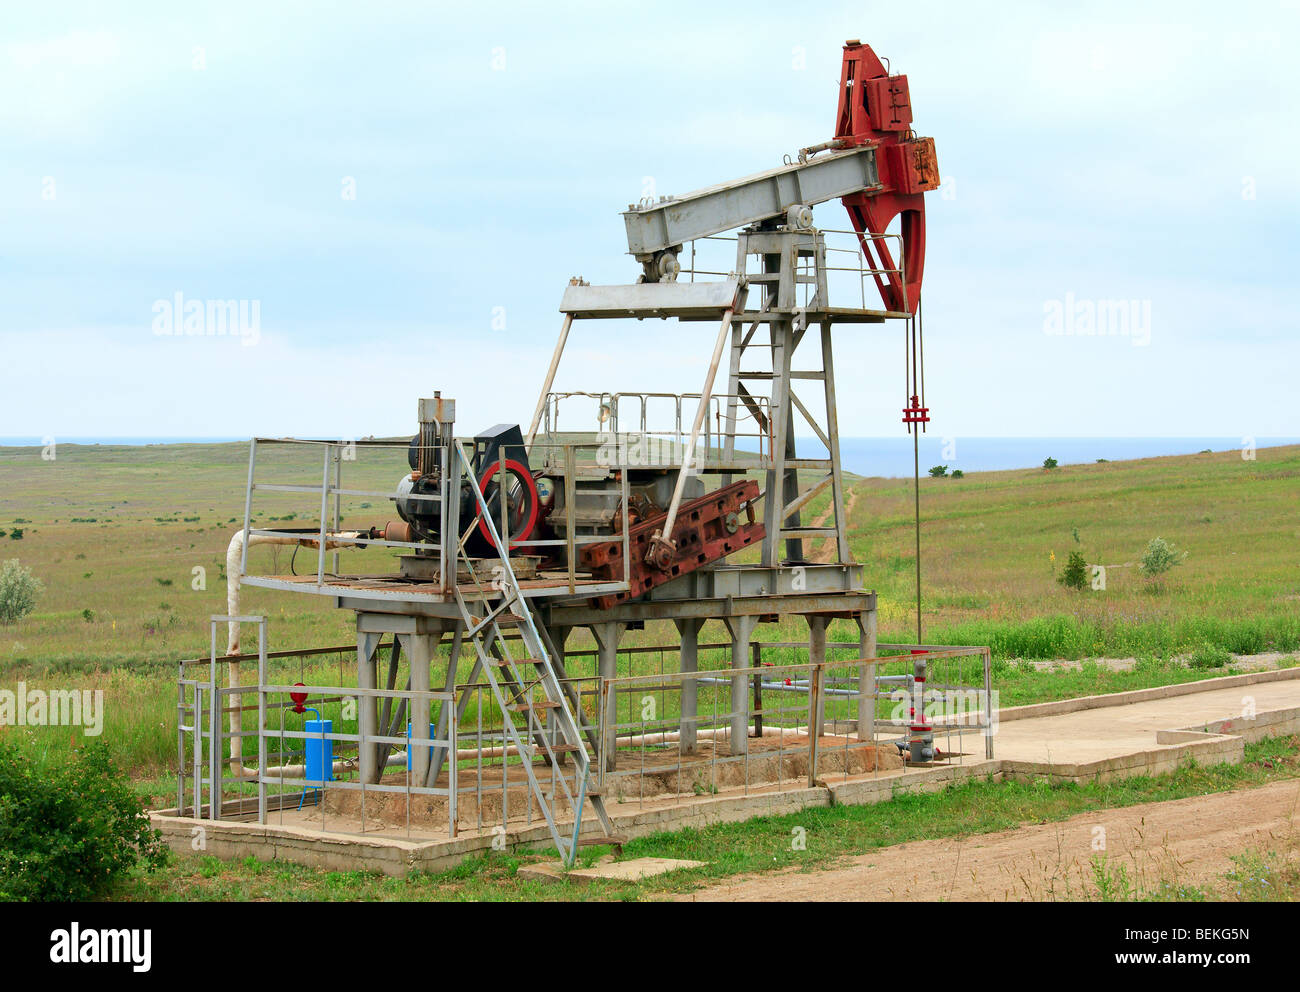 Oil produce plant in prairie (not far from the sea) Stock Photo